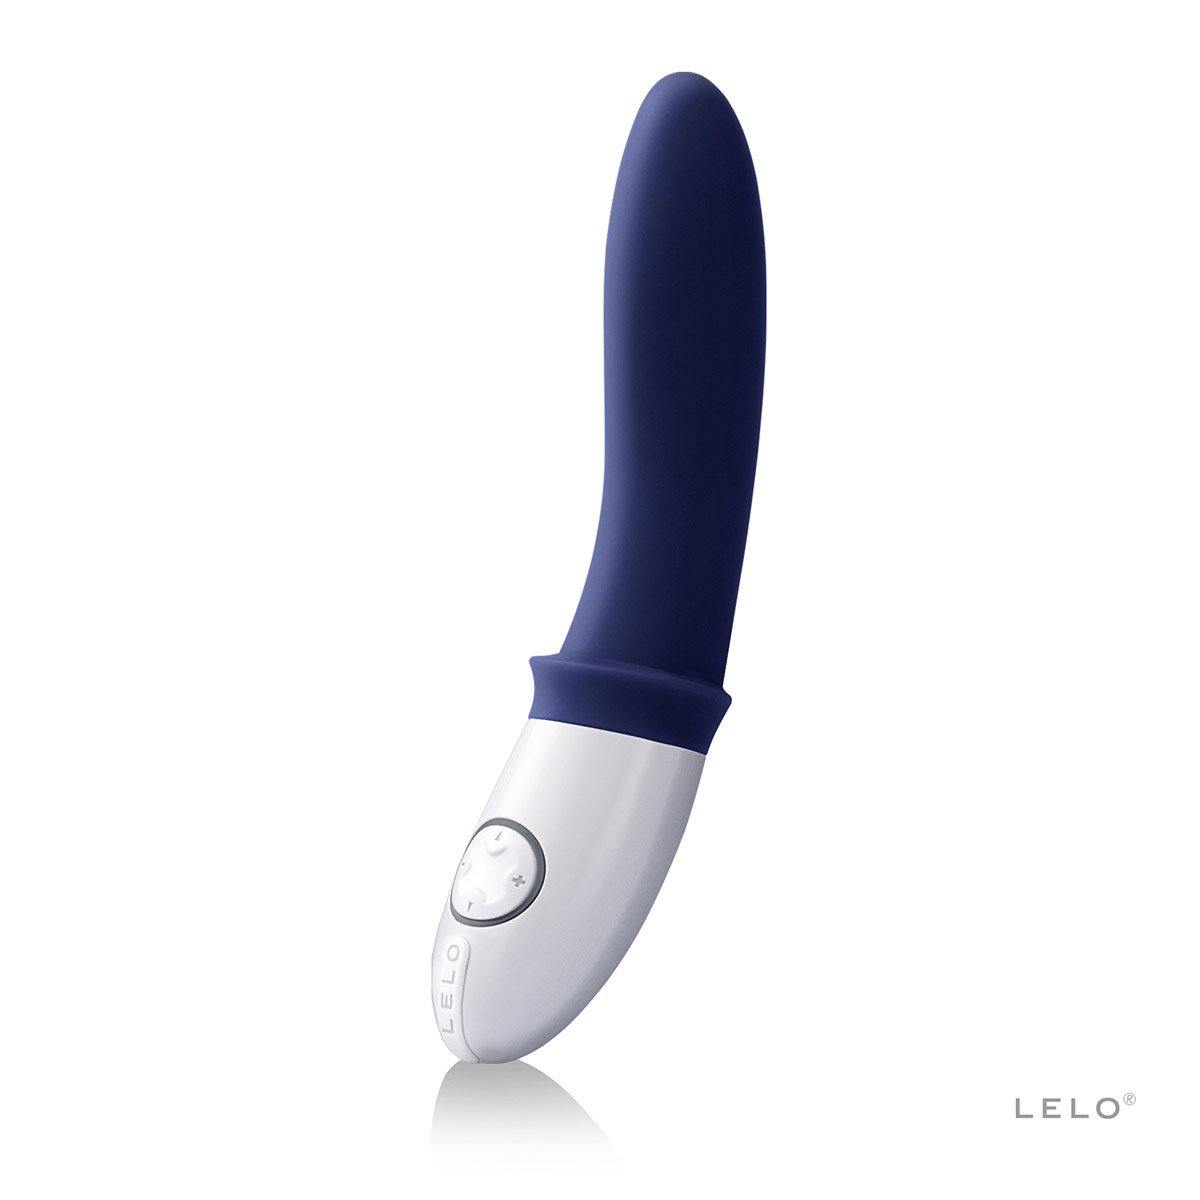 Lelo Billy 2 - Buy At Luxury Toy X - Free 3-Day Shipping